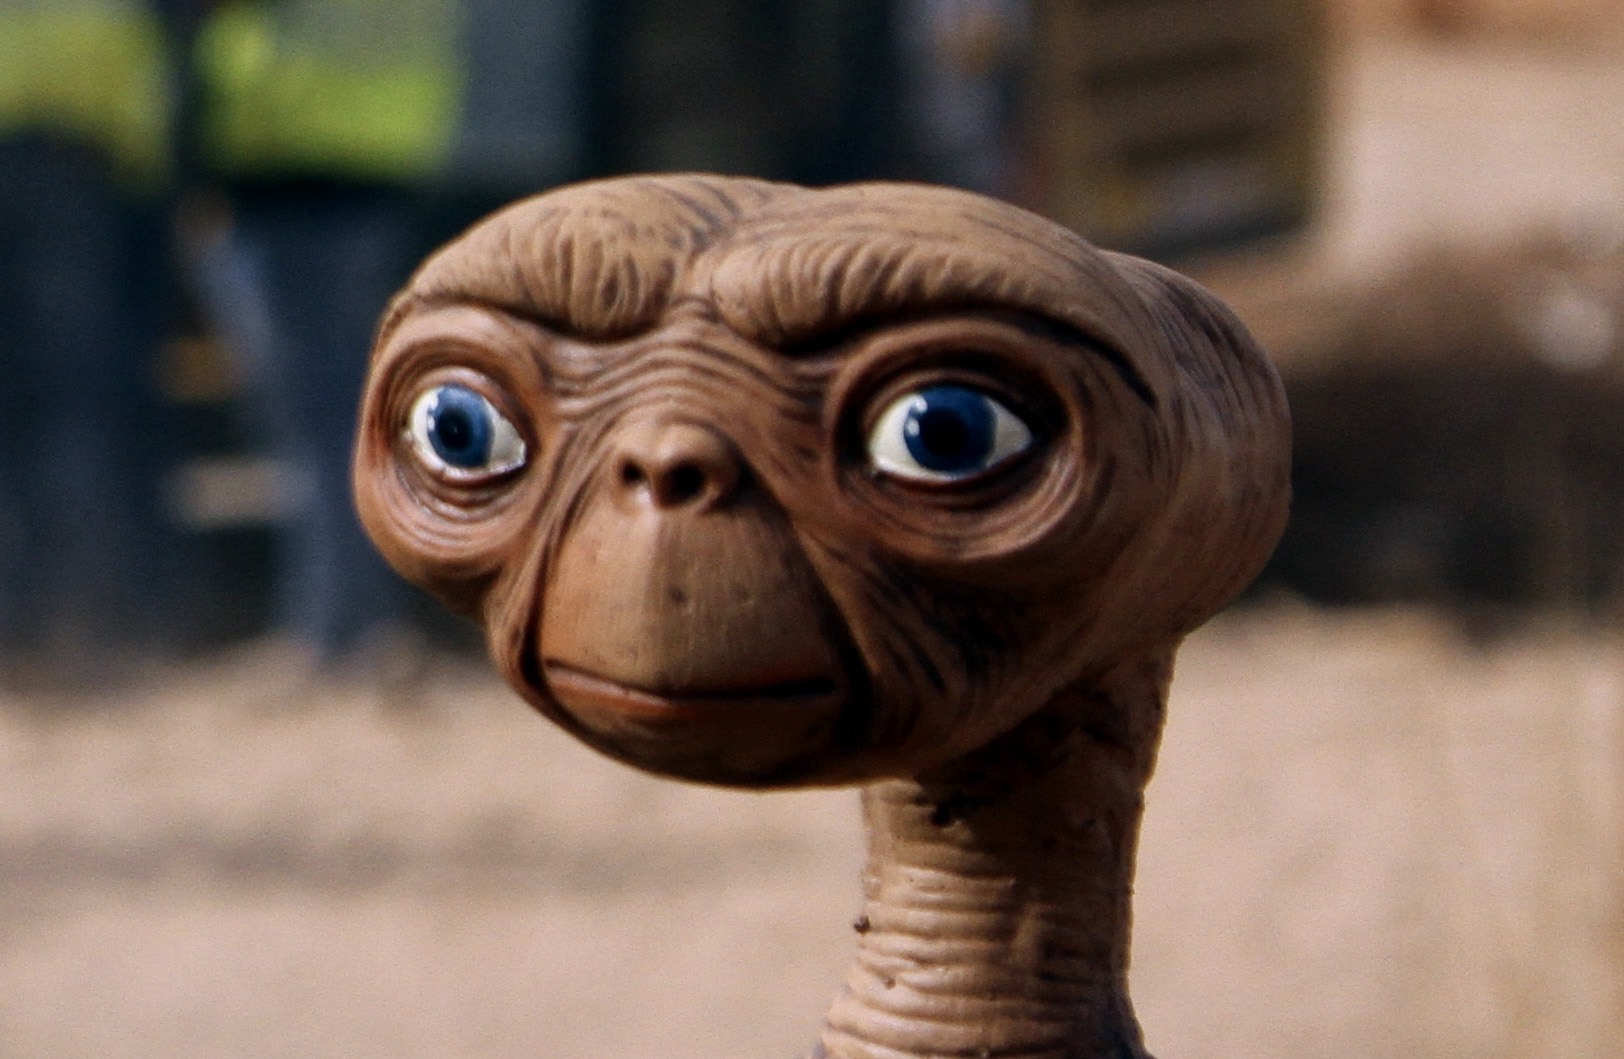 This Freaky Skinless E.T. Animatronic Model Just Sold for $2.56 Million -  CNET